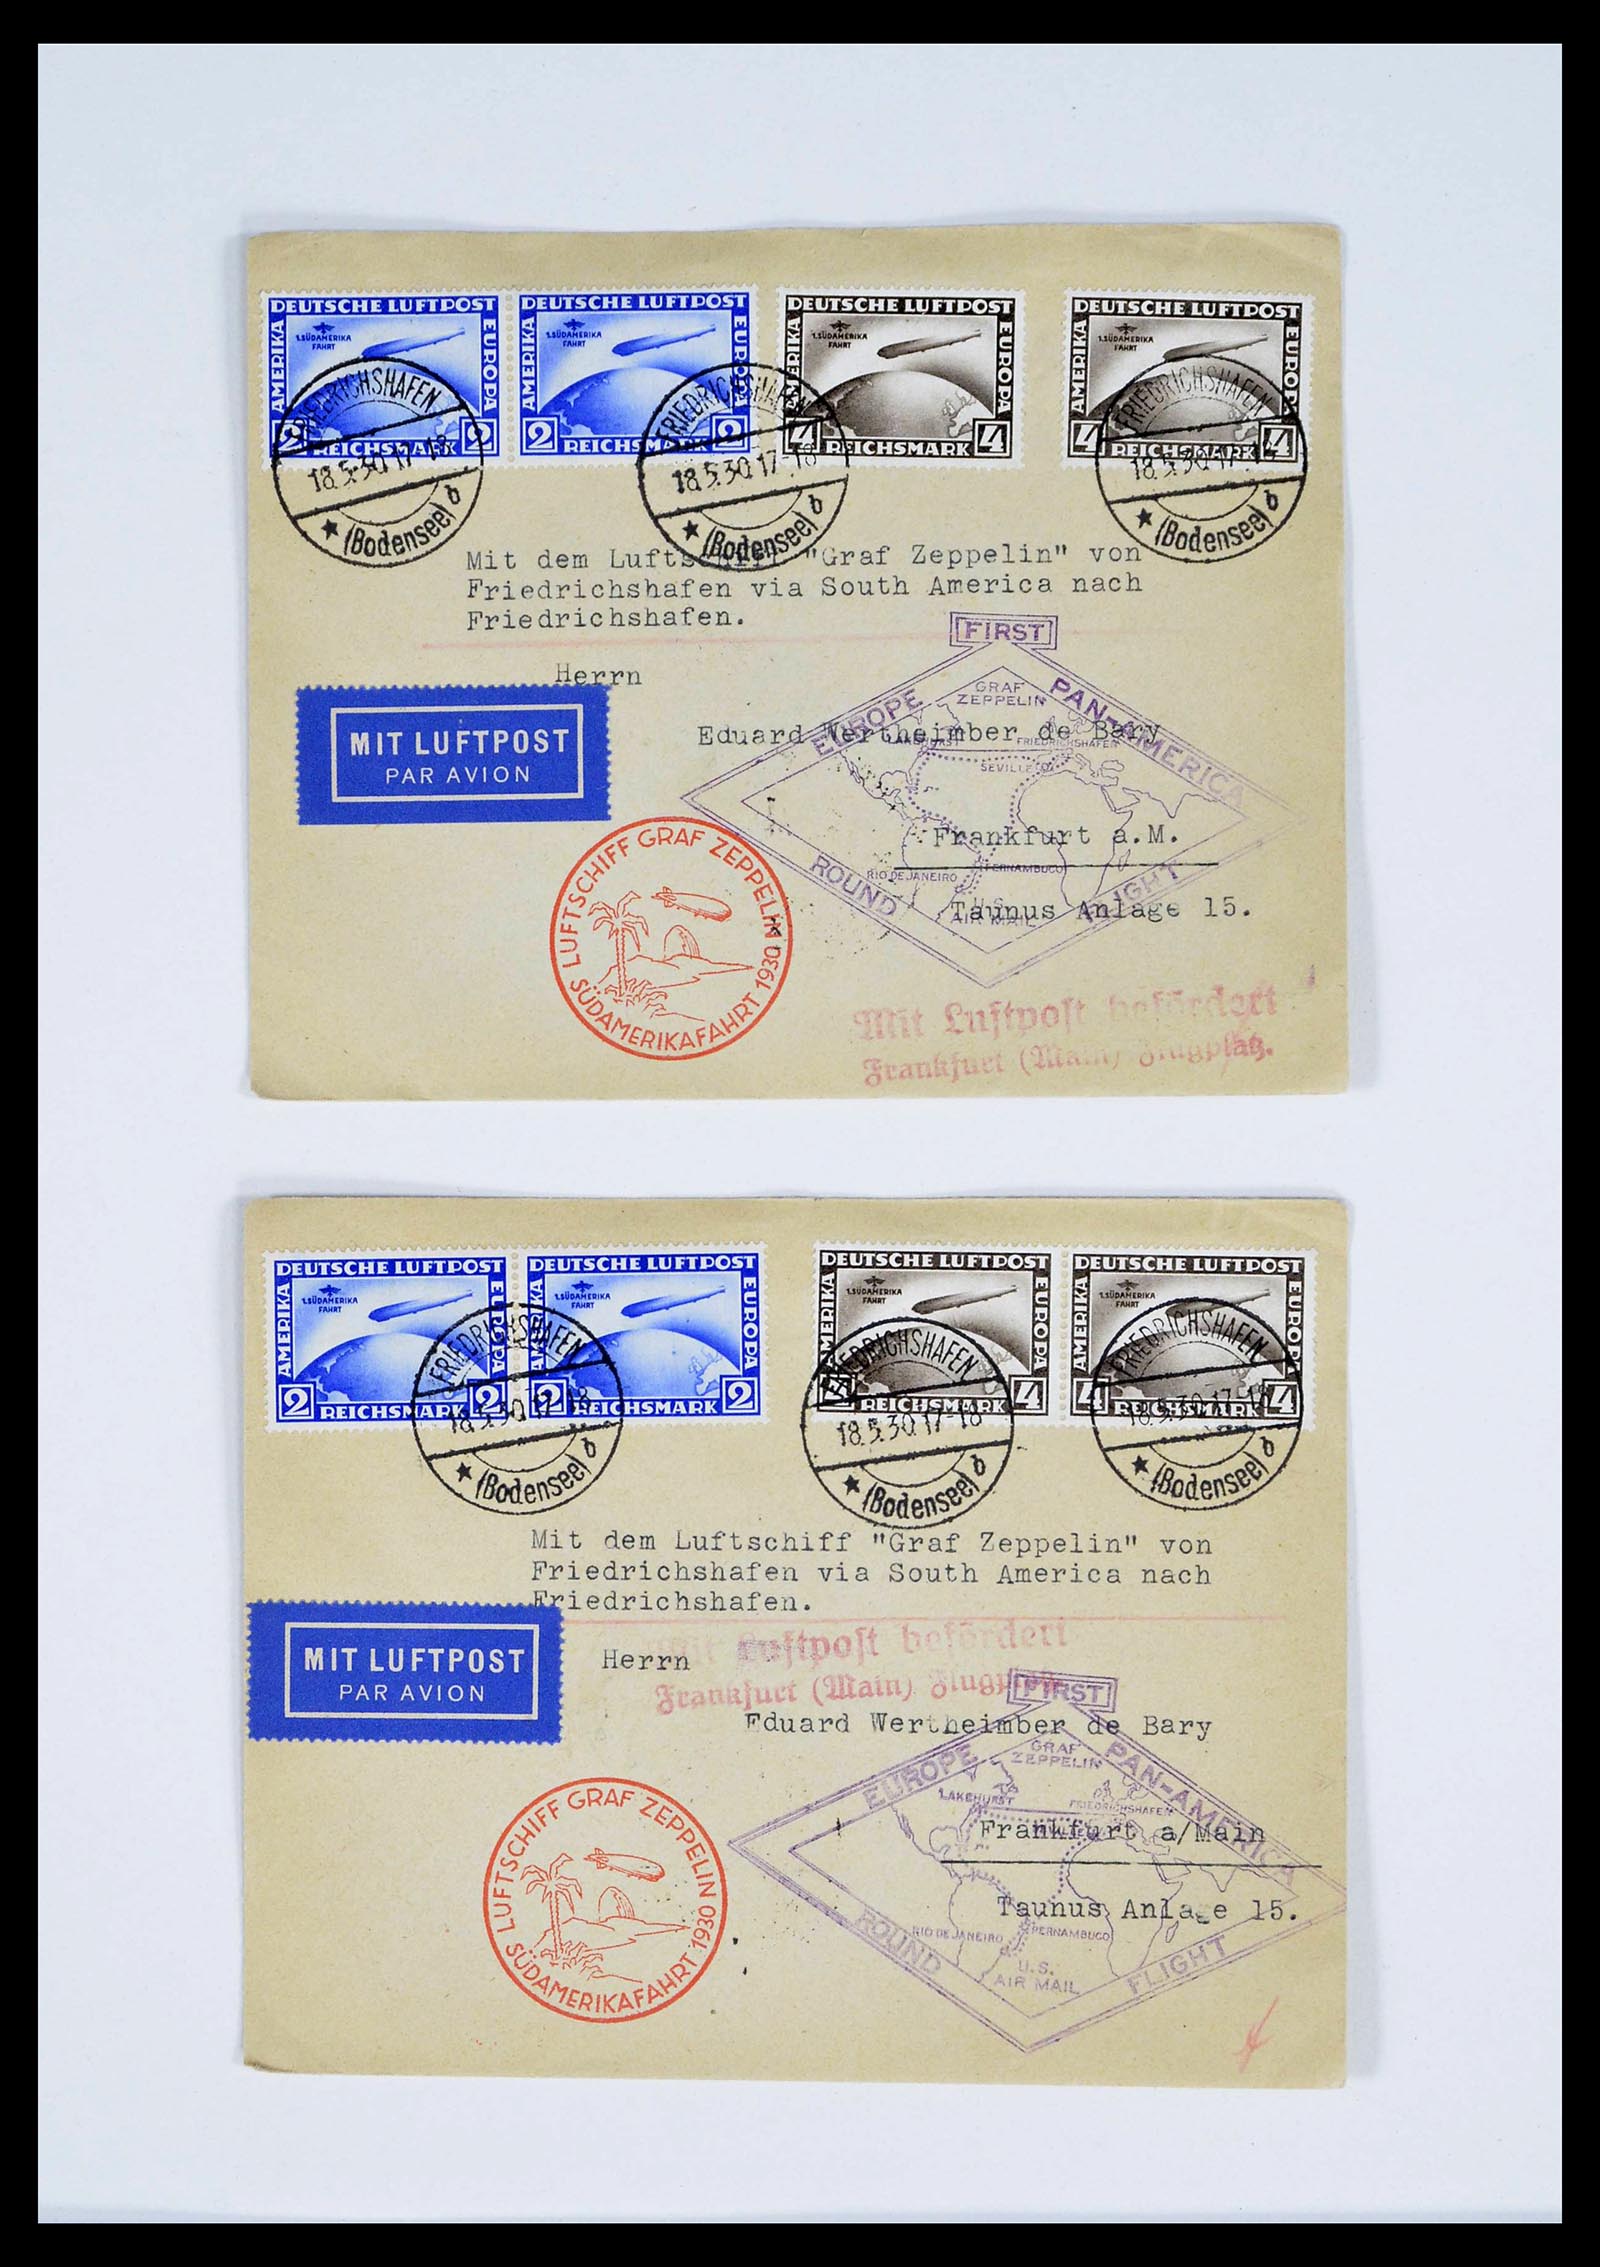 39032 0011 - Stamp collection 39032 Zeppelin covers 1928-1933.